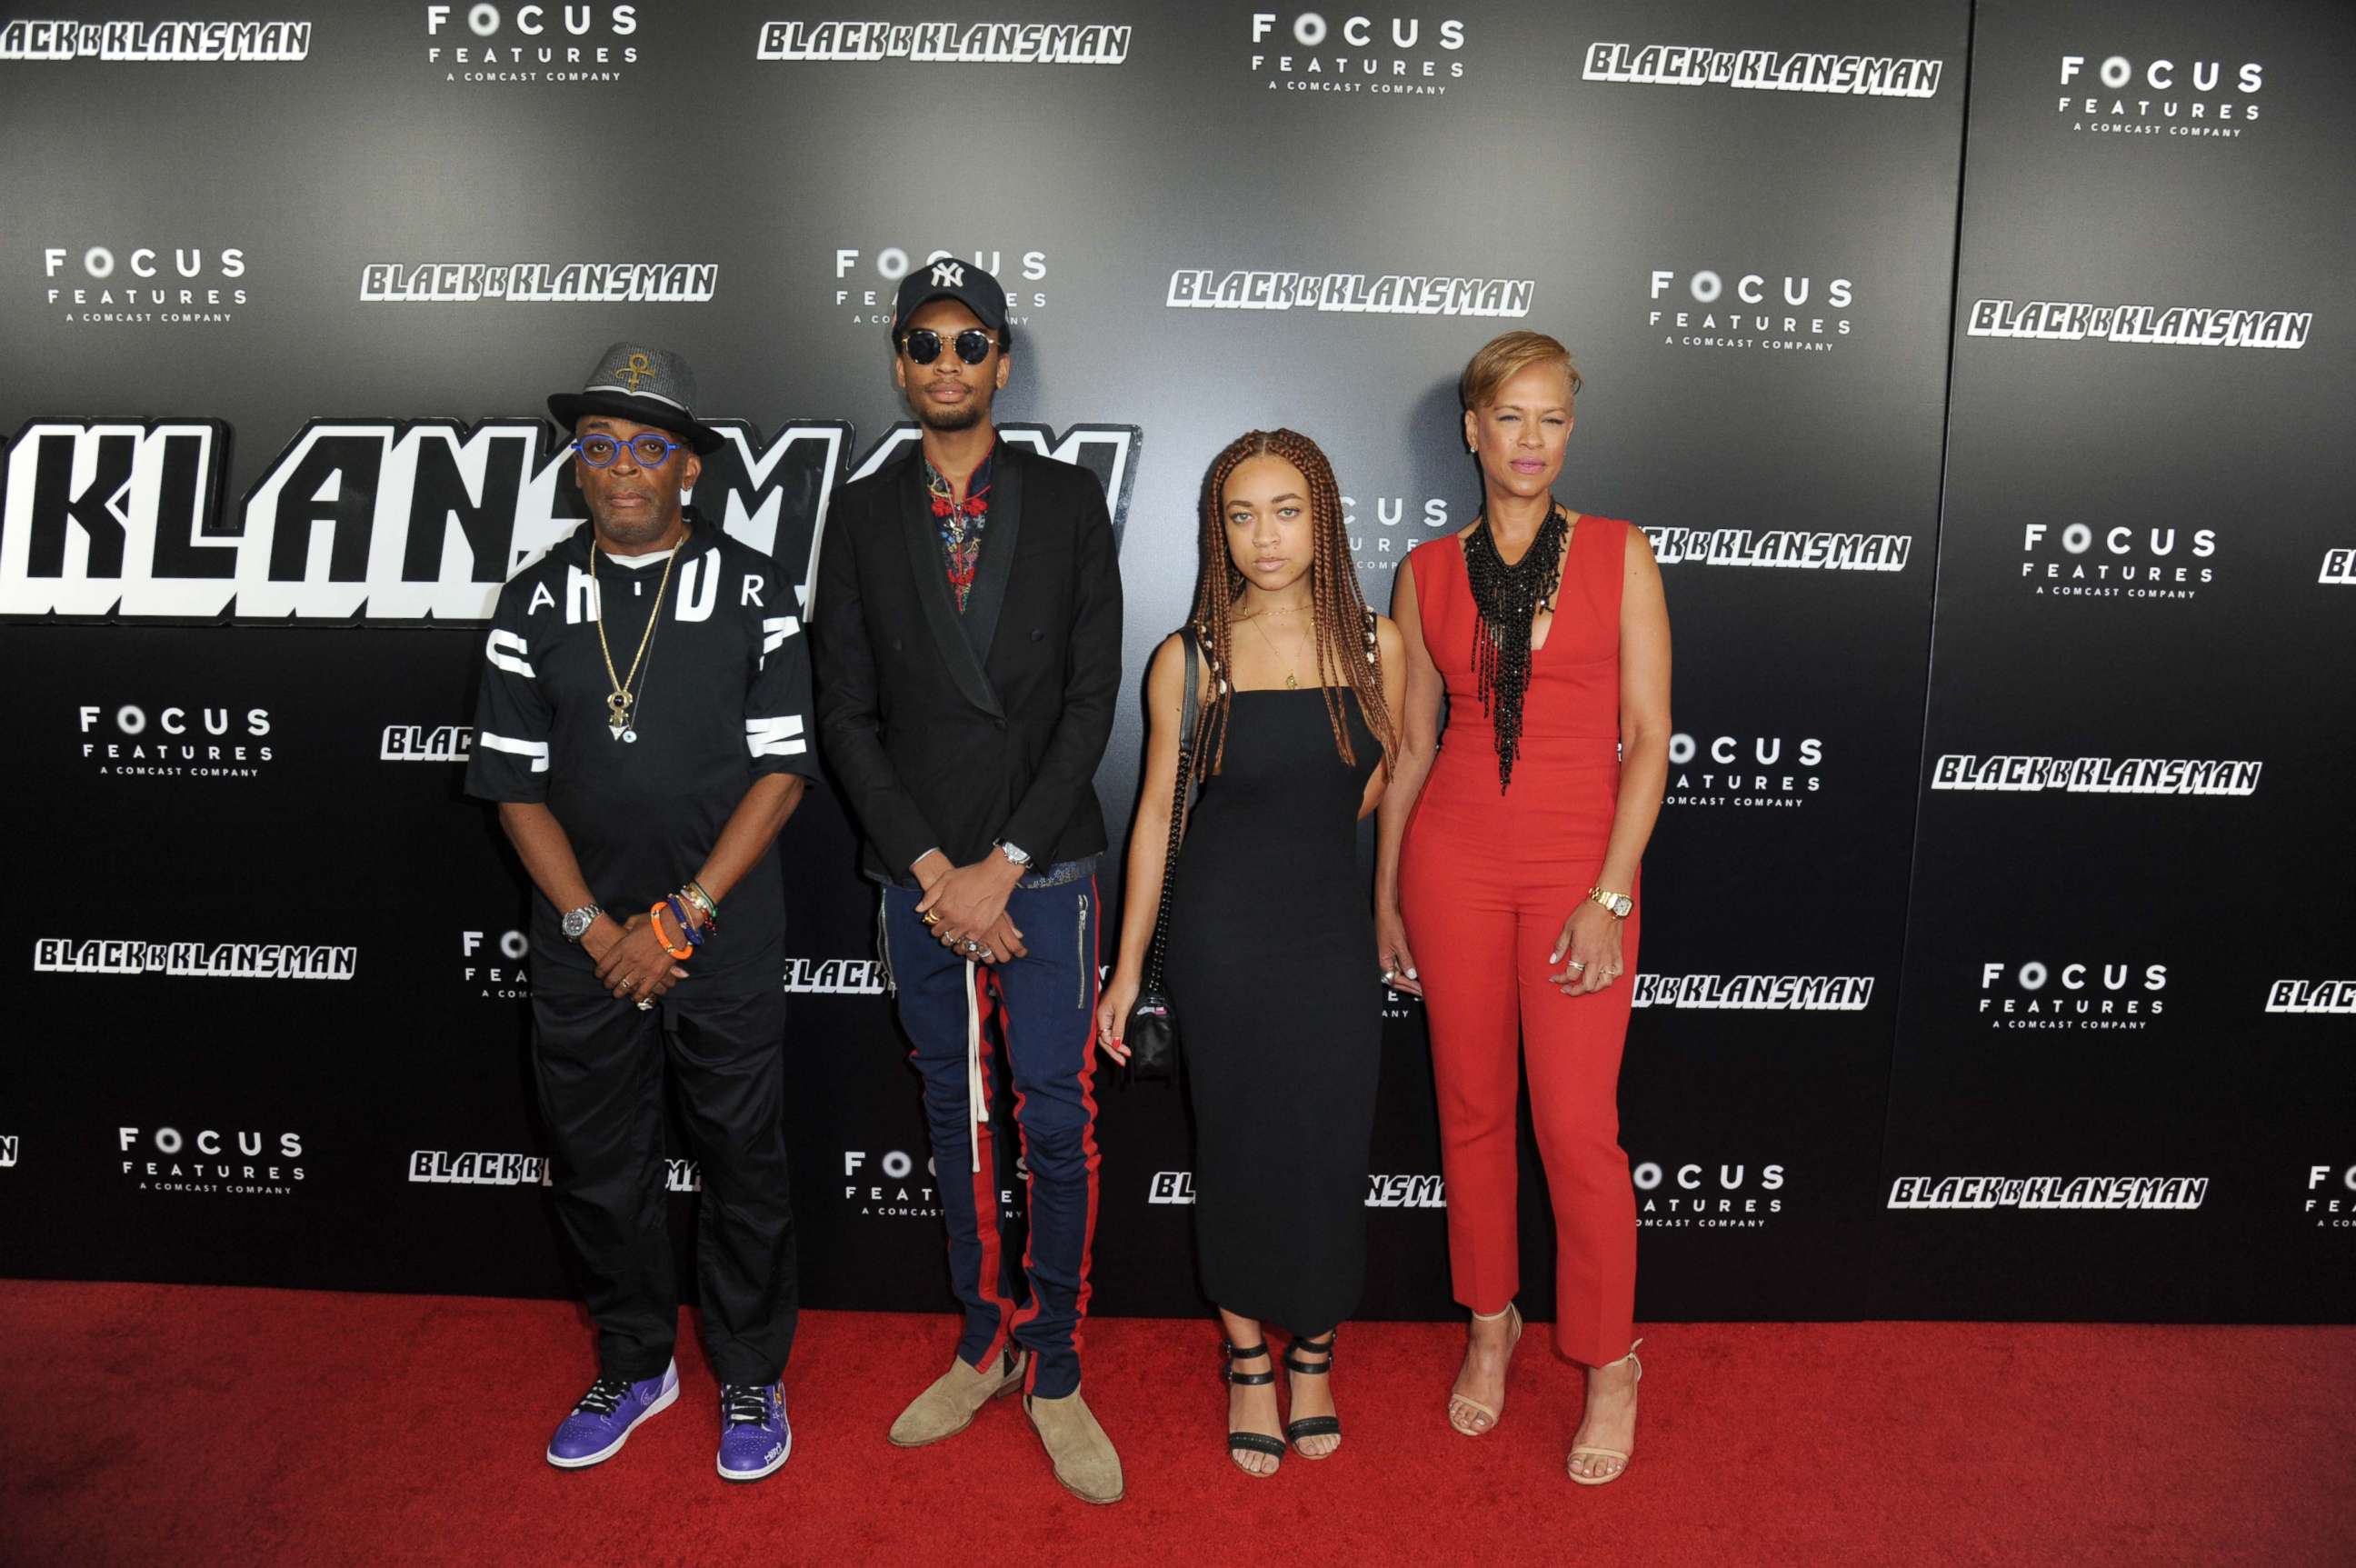 PHOTO: Director Spike Lee attends his New York premiere of BlacKKKlansman with his family, Jackson Lee, Satchel Lee, Tonya Lewis Lee, at the BAM Harvey Theatre in downtown Brooklyn, N.Y., July 30, 2018.